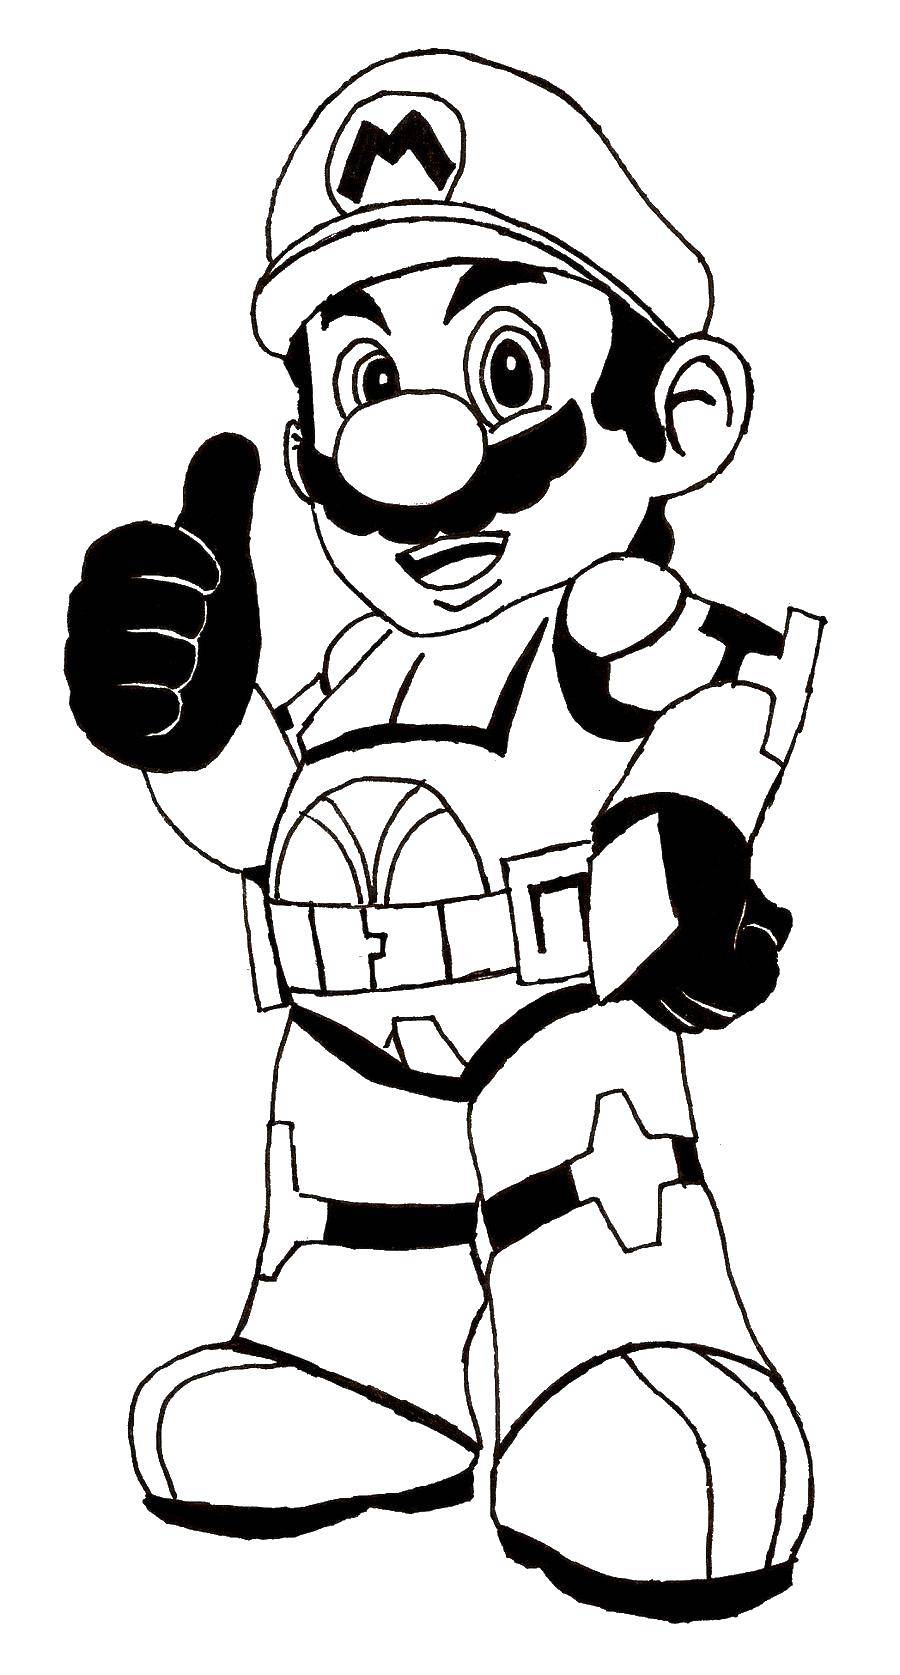 Coloring Equipped Mario. Category Mario. Tags:  Mario, characters, games.